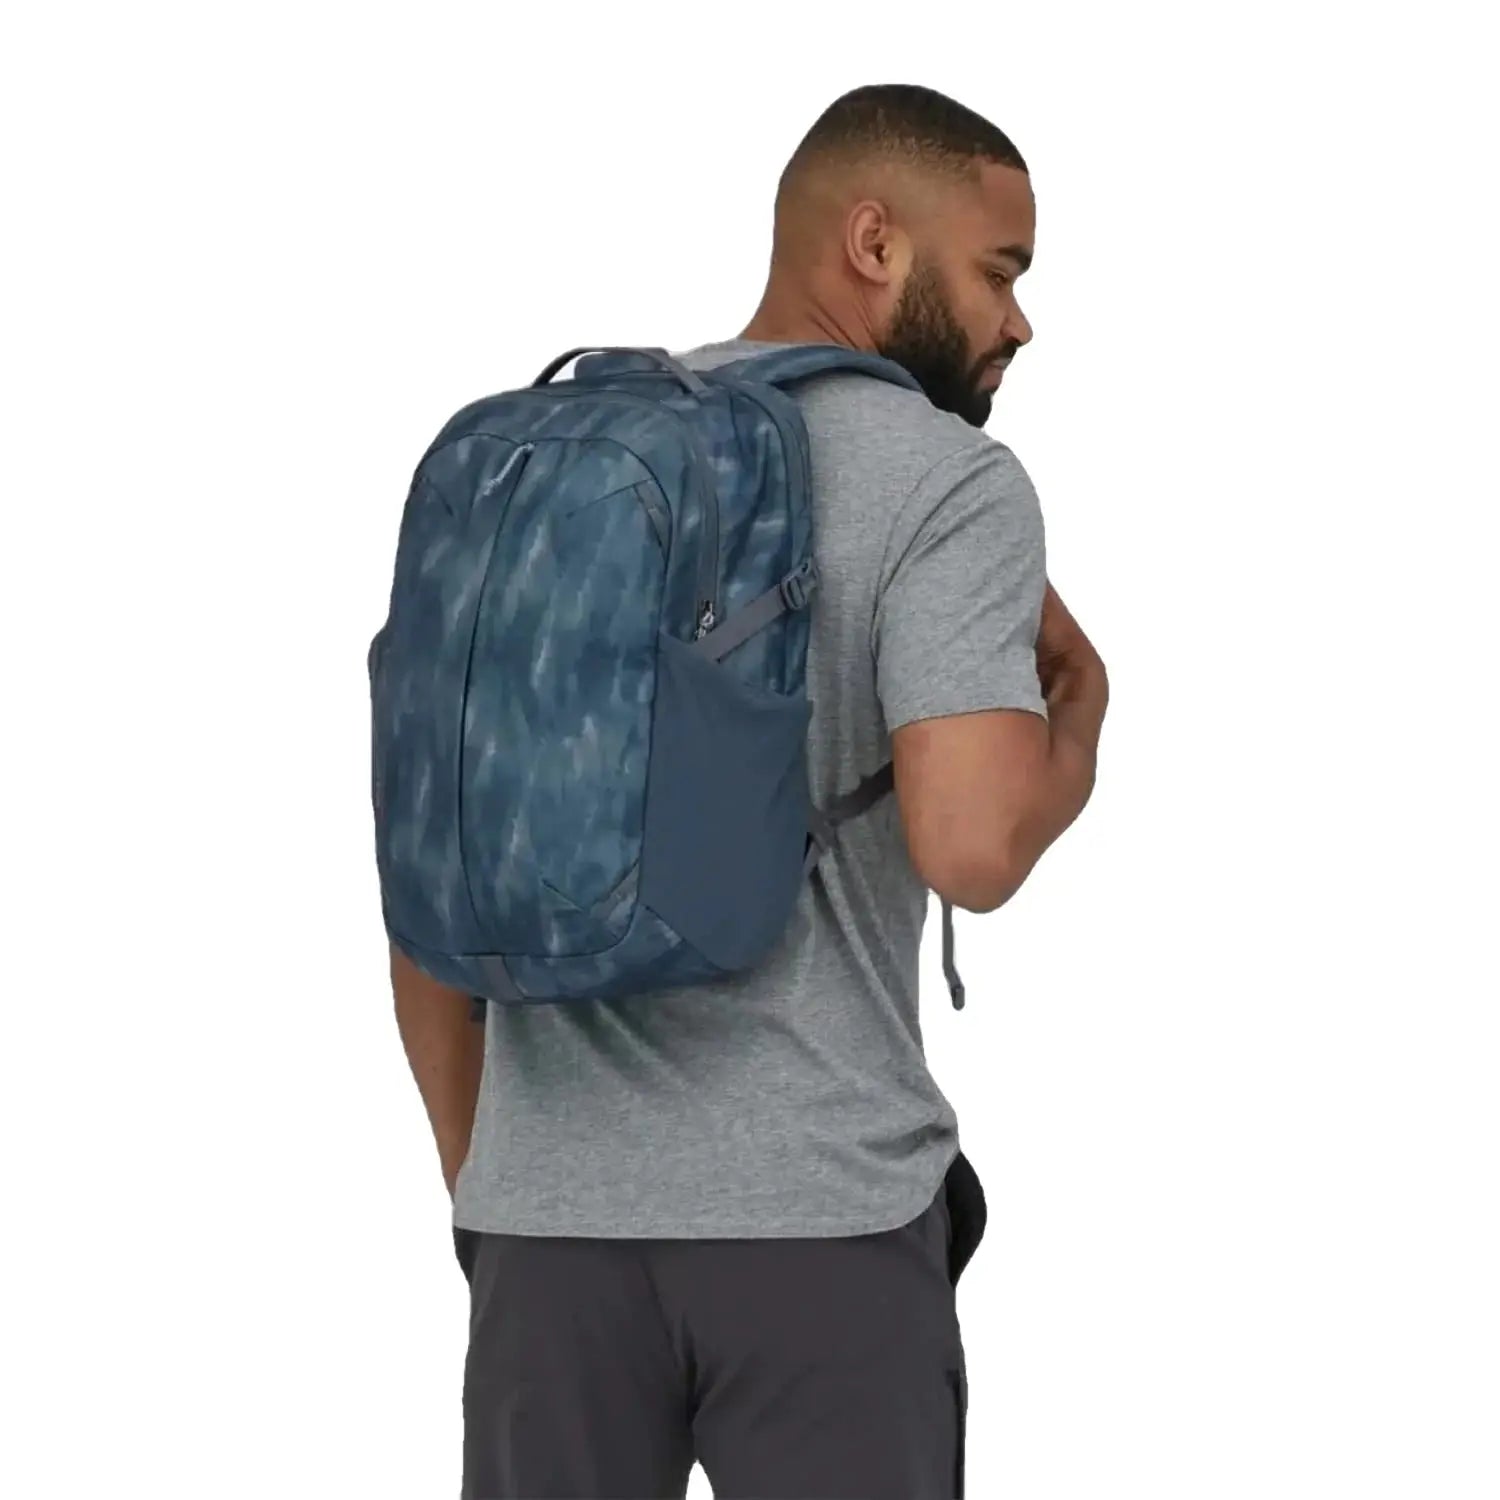 Patagonia refugio daypack 26L, agave plume grey, back view on model